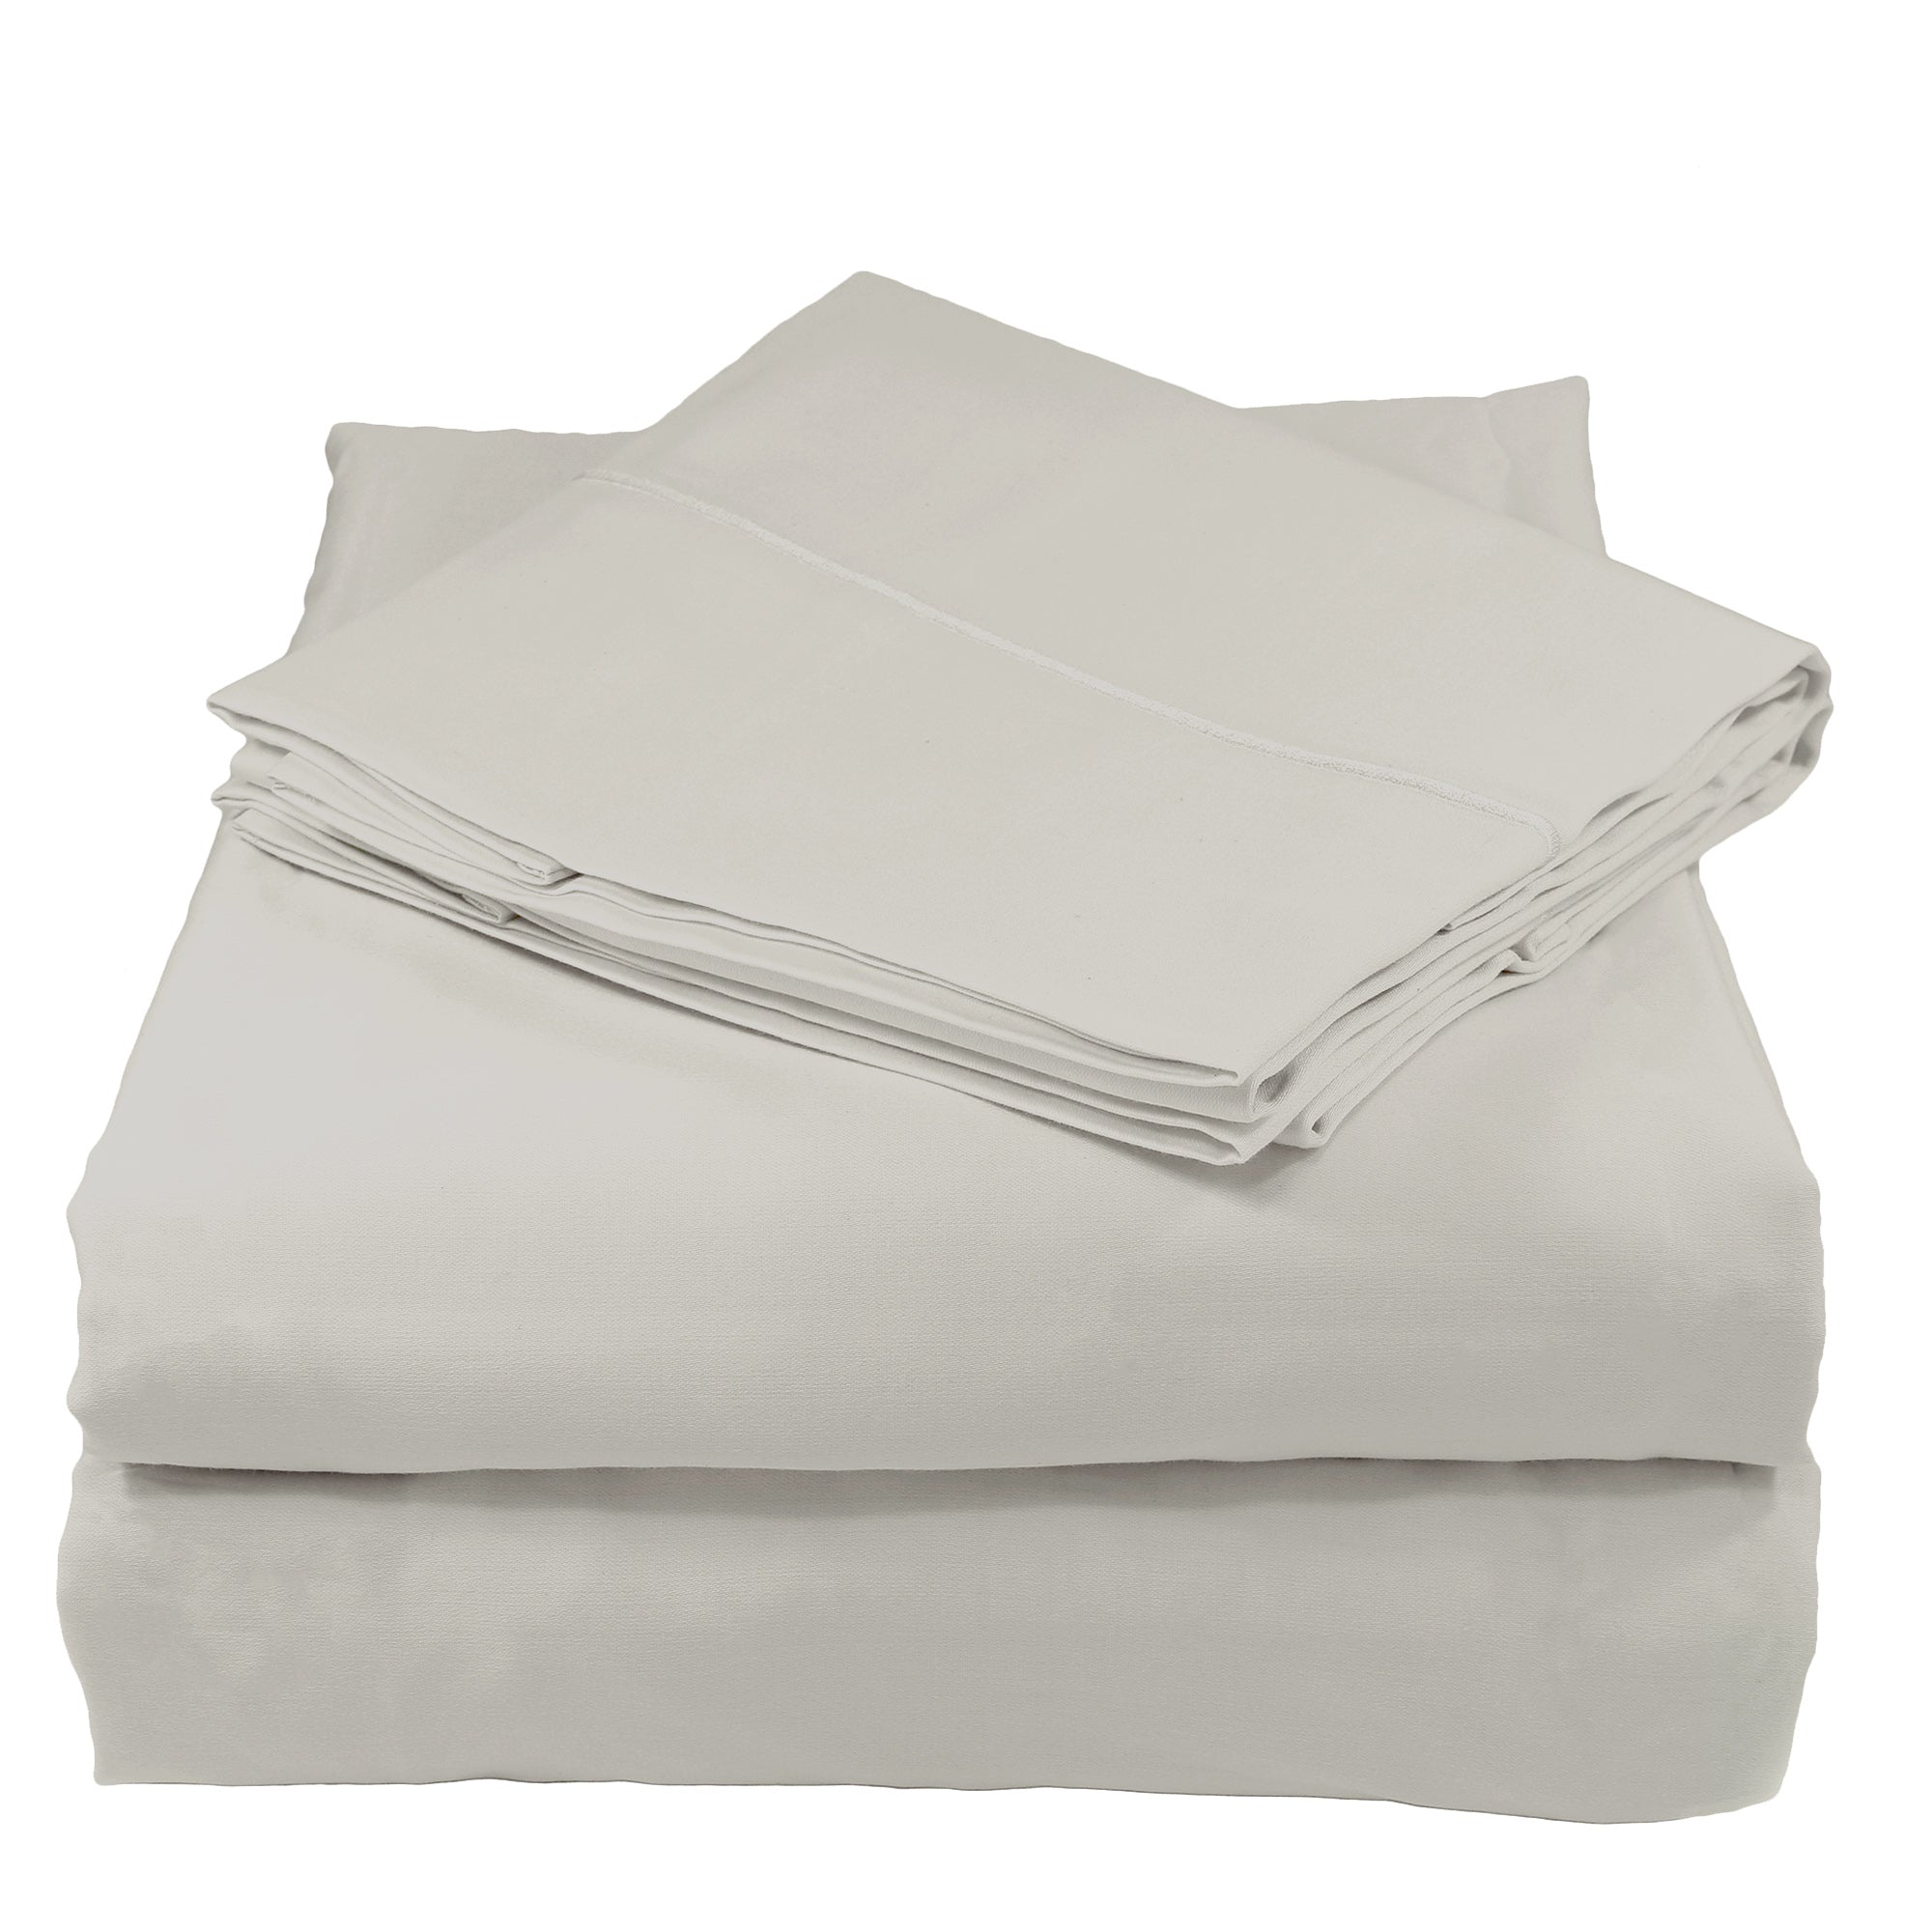 300 Thread Count Organic Sheets (Size Twin, Color Silver)